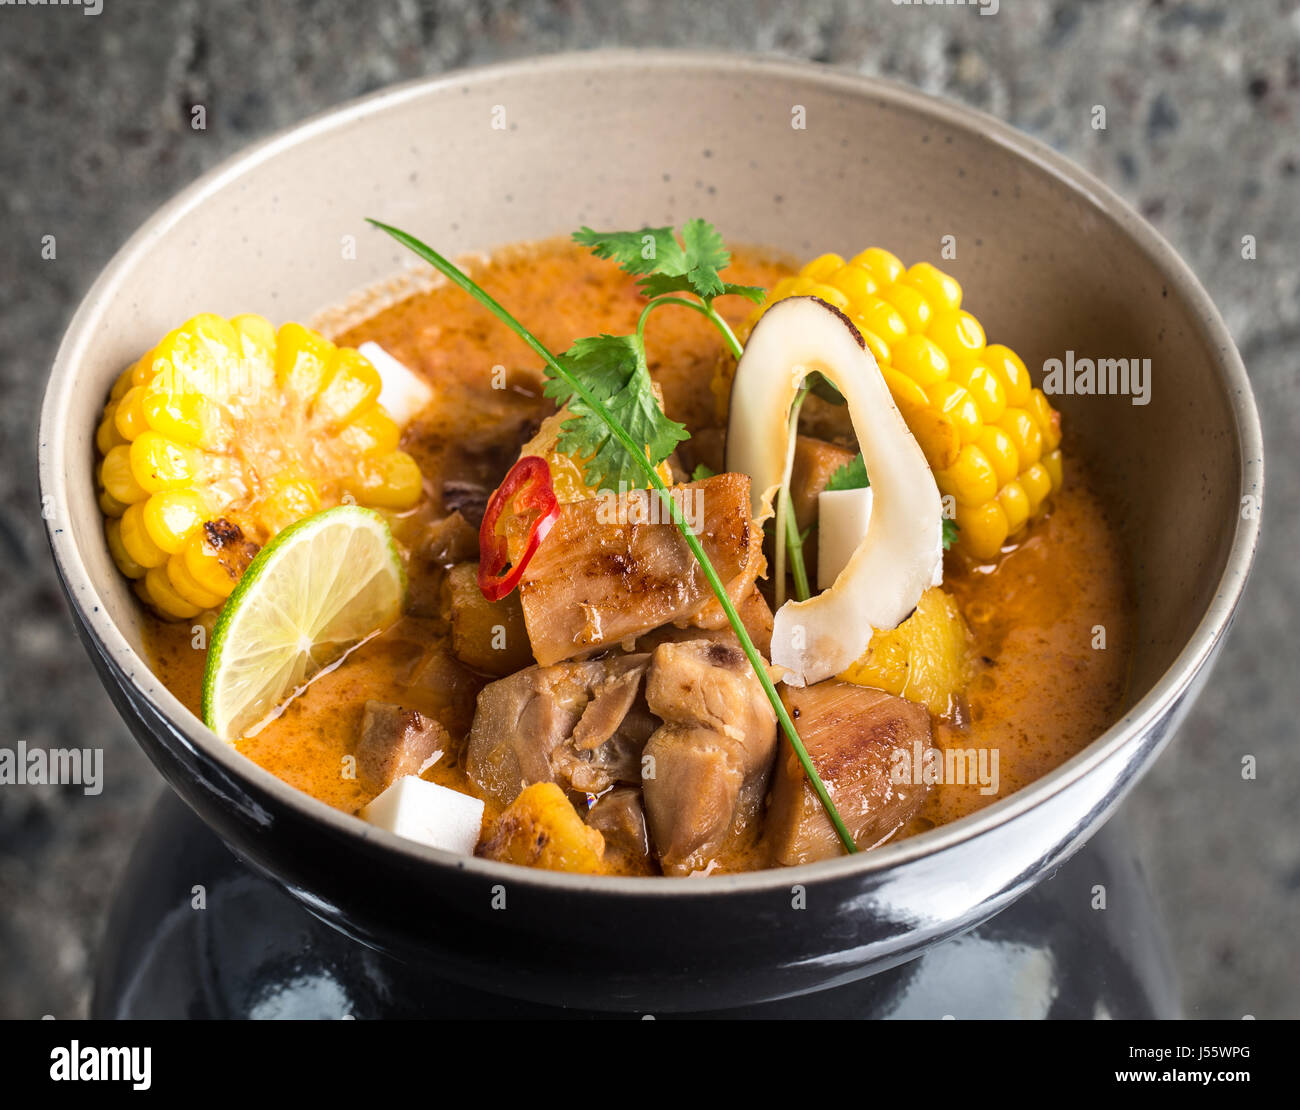 Curry chicken in a bowl Stock Photo